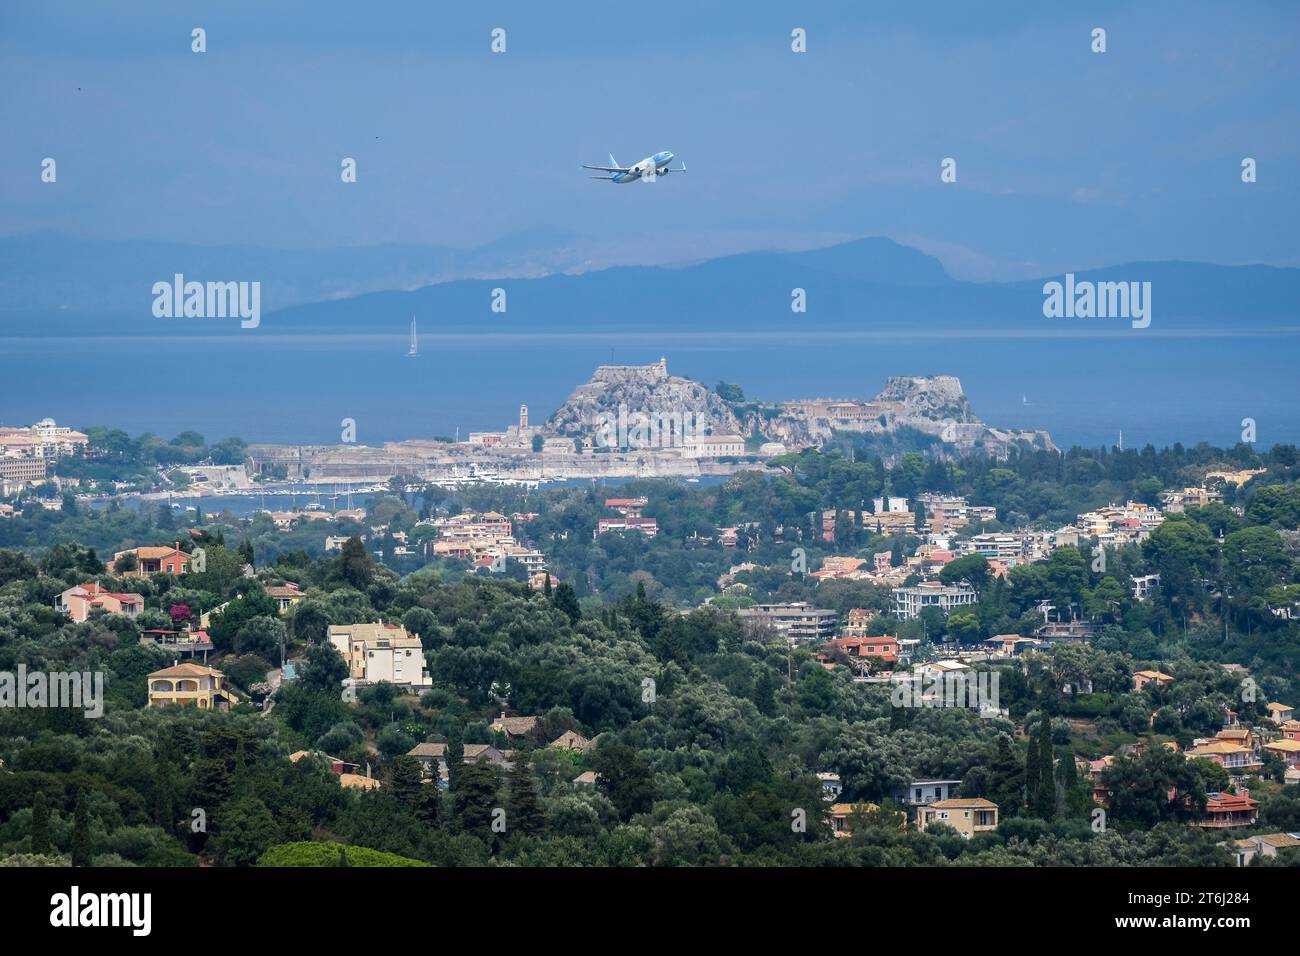 Corfu town, Corfu, Greece, Corfu town city overview. TUI airplane takes off from Corfu airport and flies over the town, in the background the mainland of Albania. Stock Photo